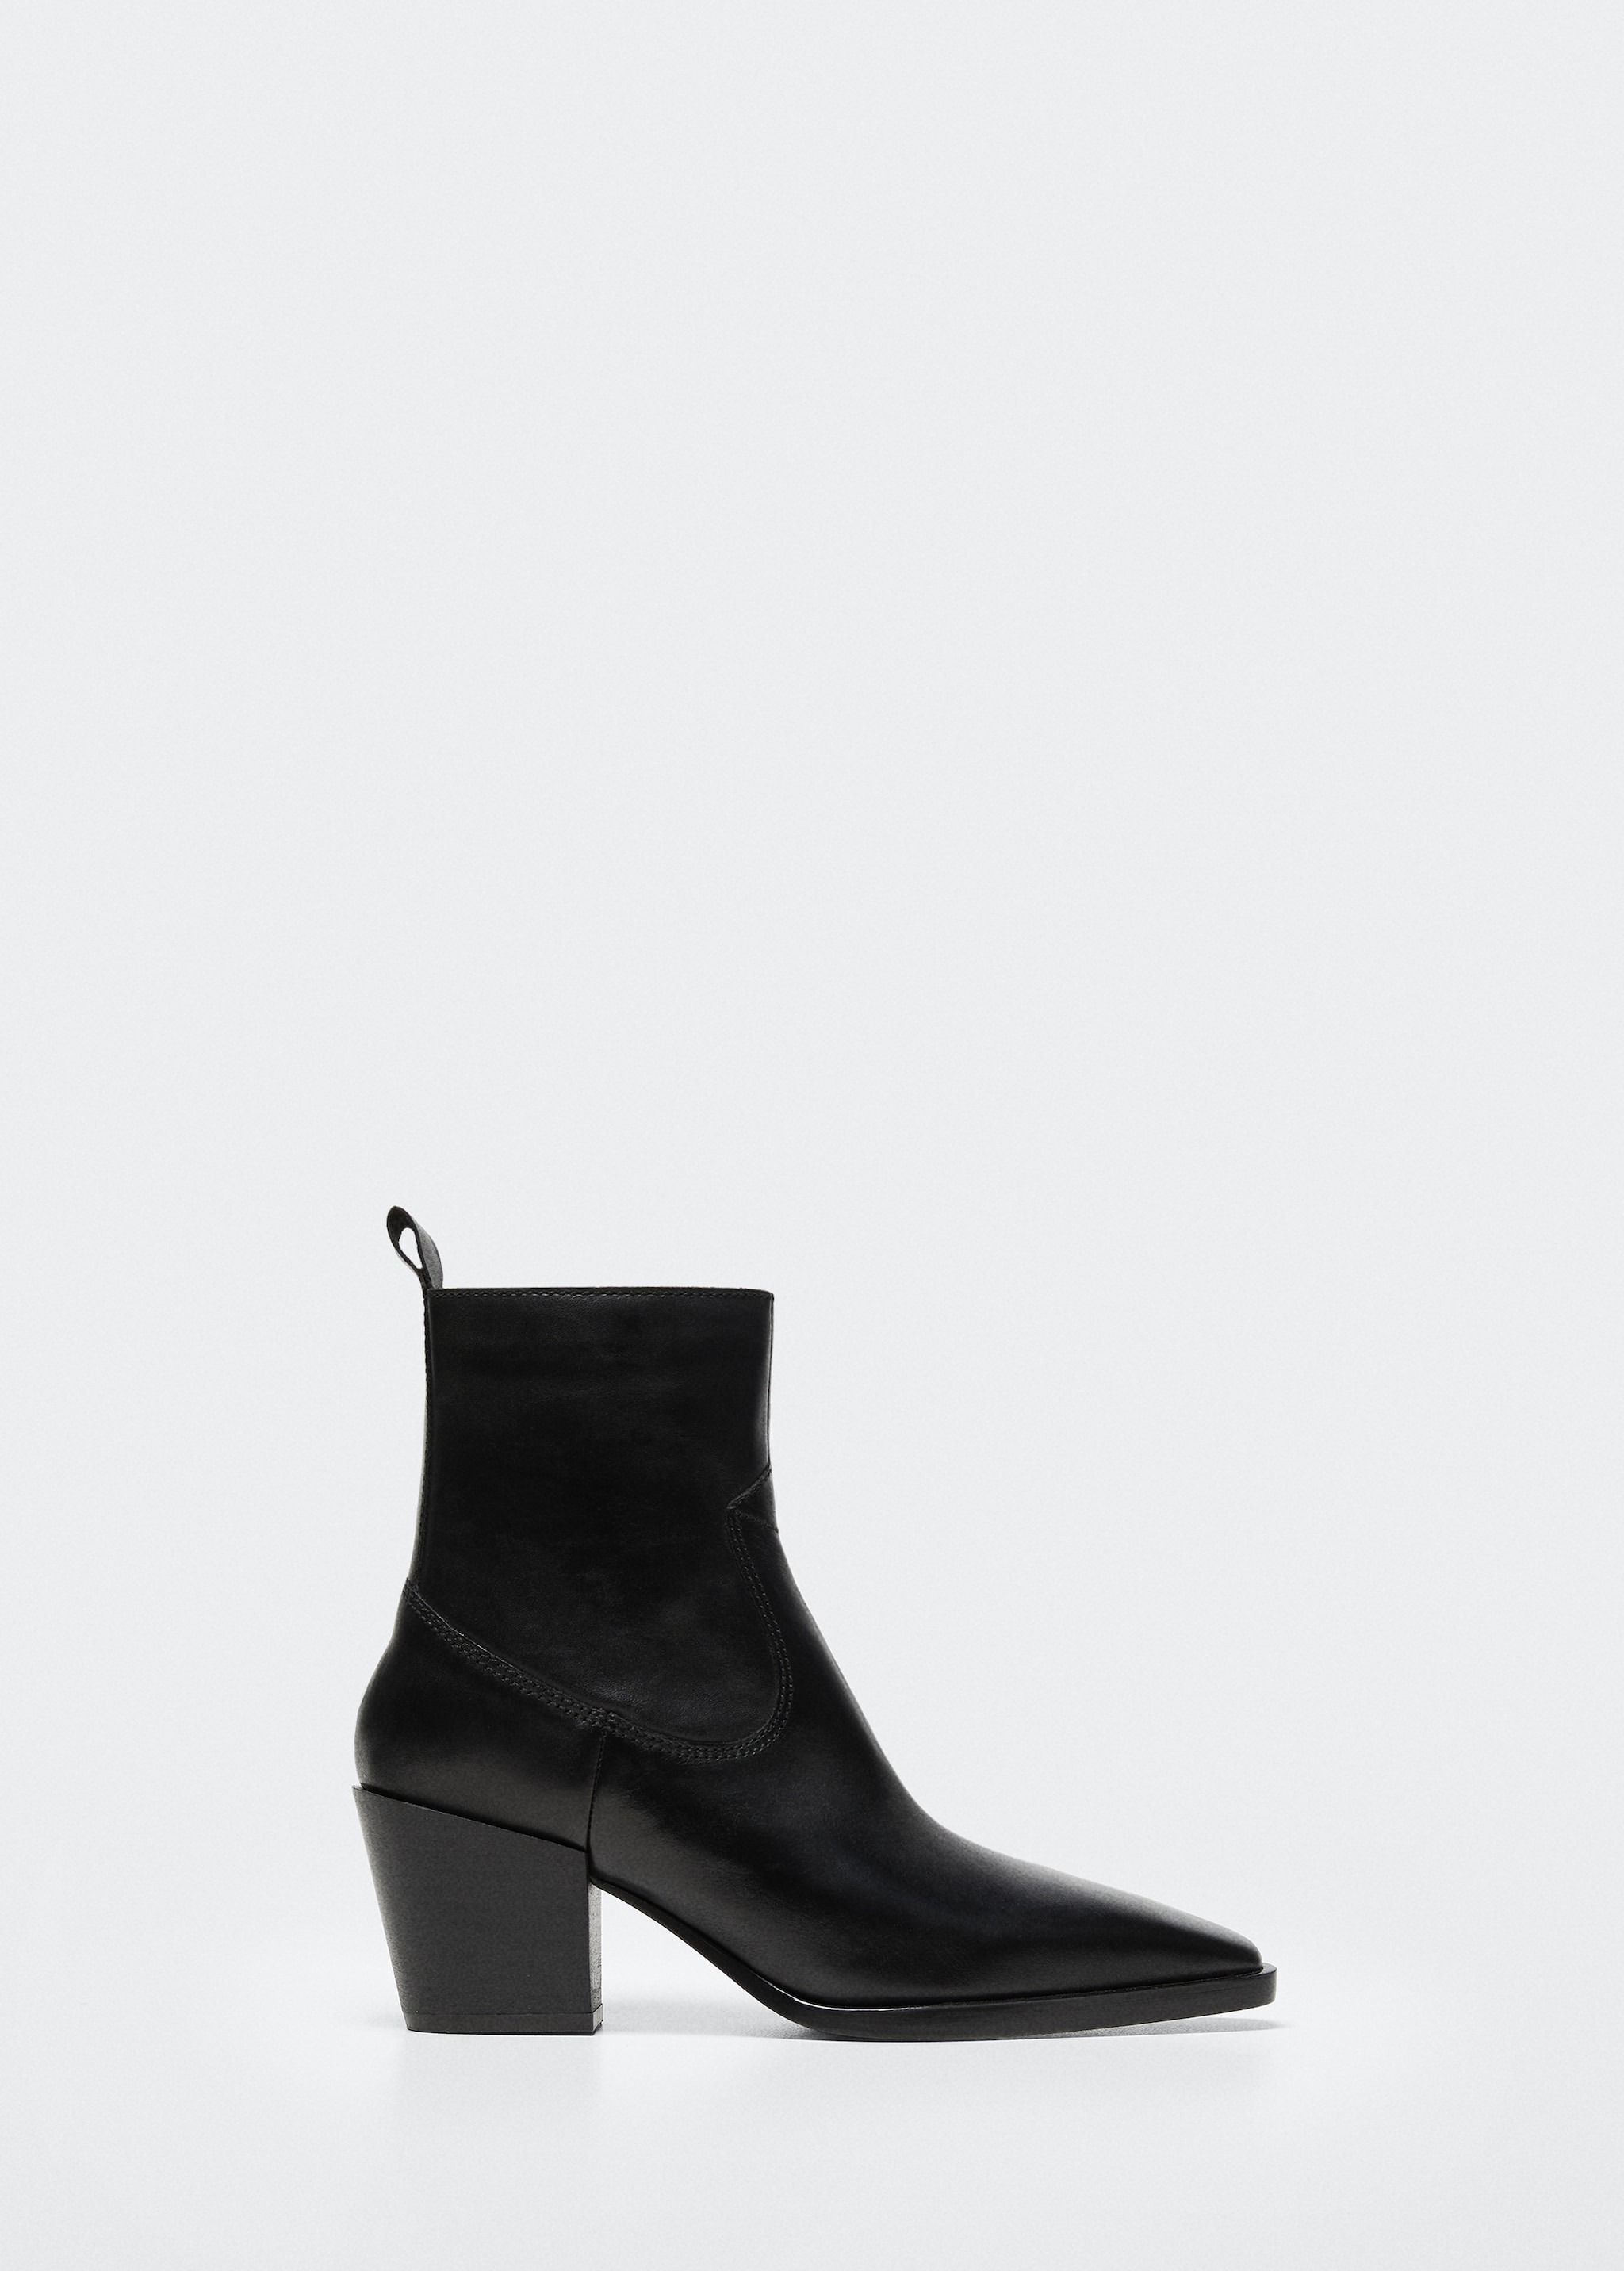 Heel leather ankle boot - Article without model